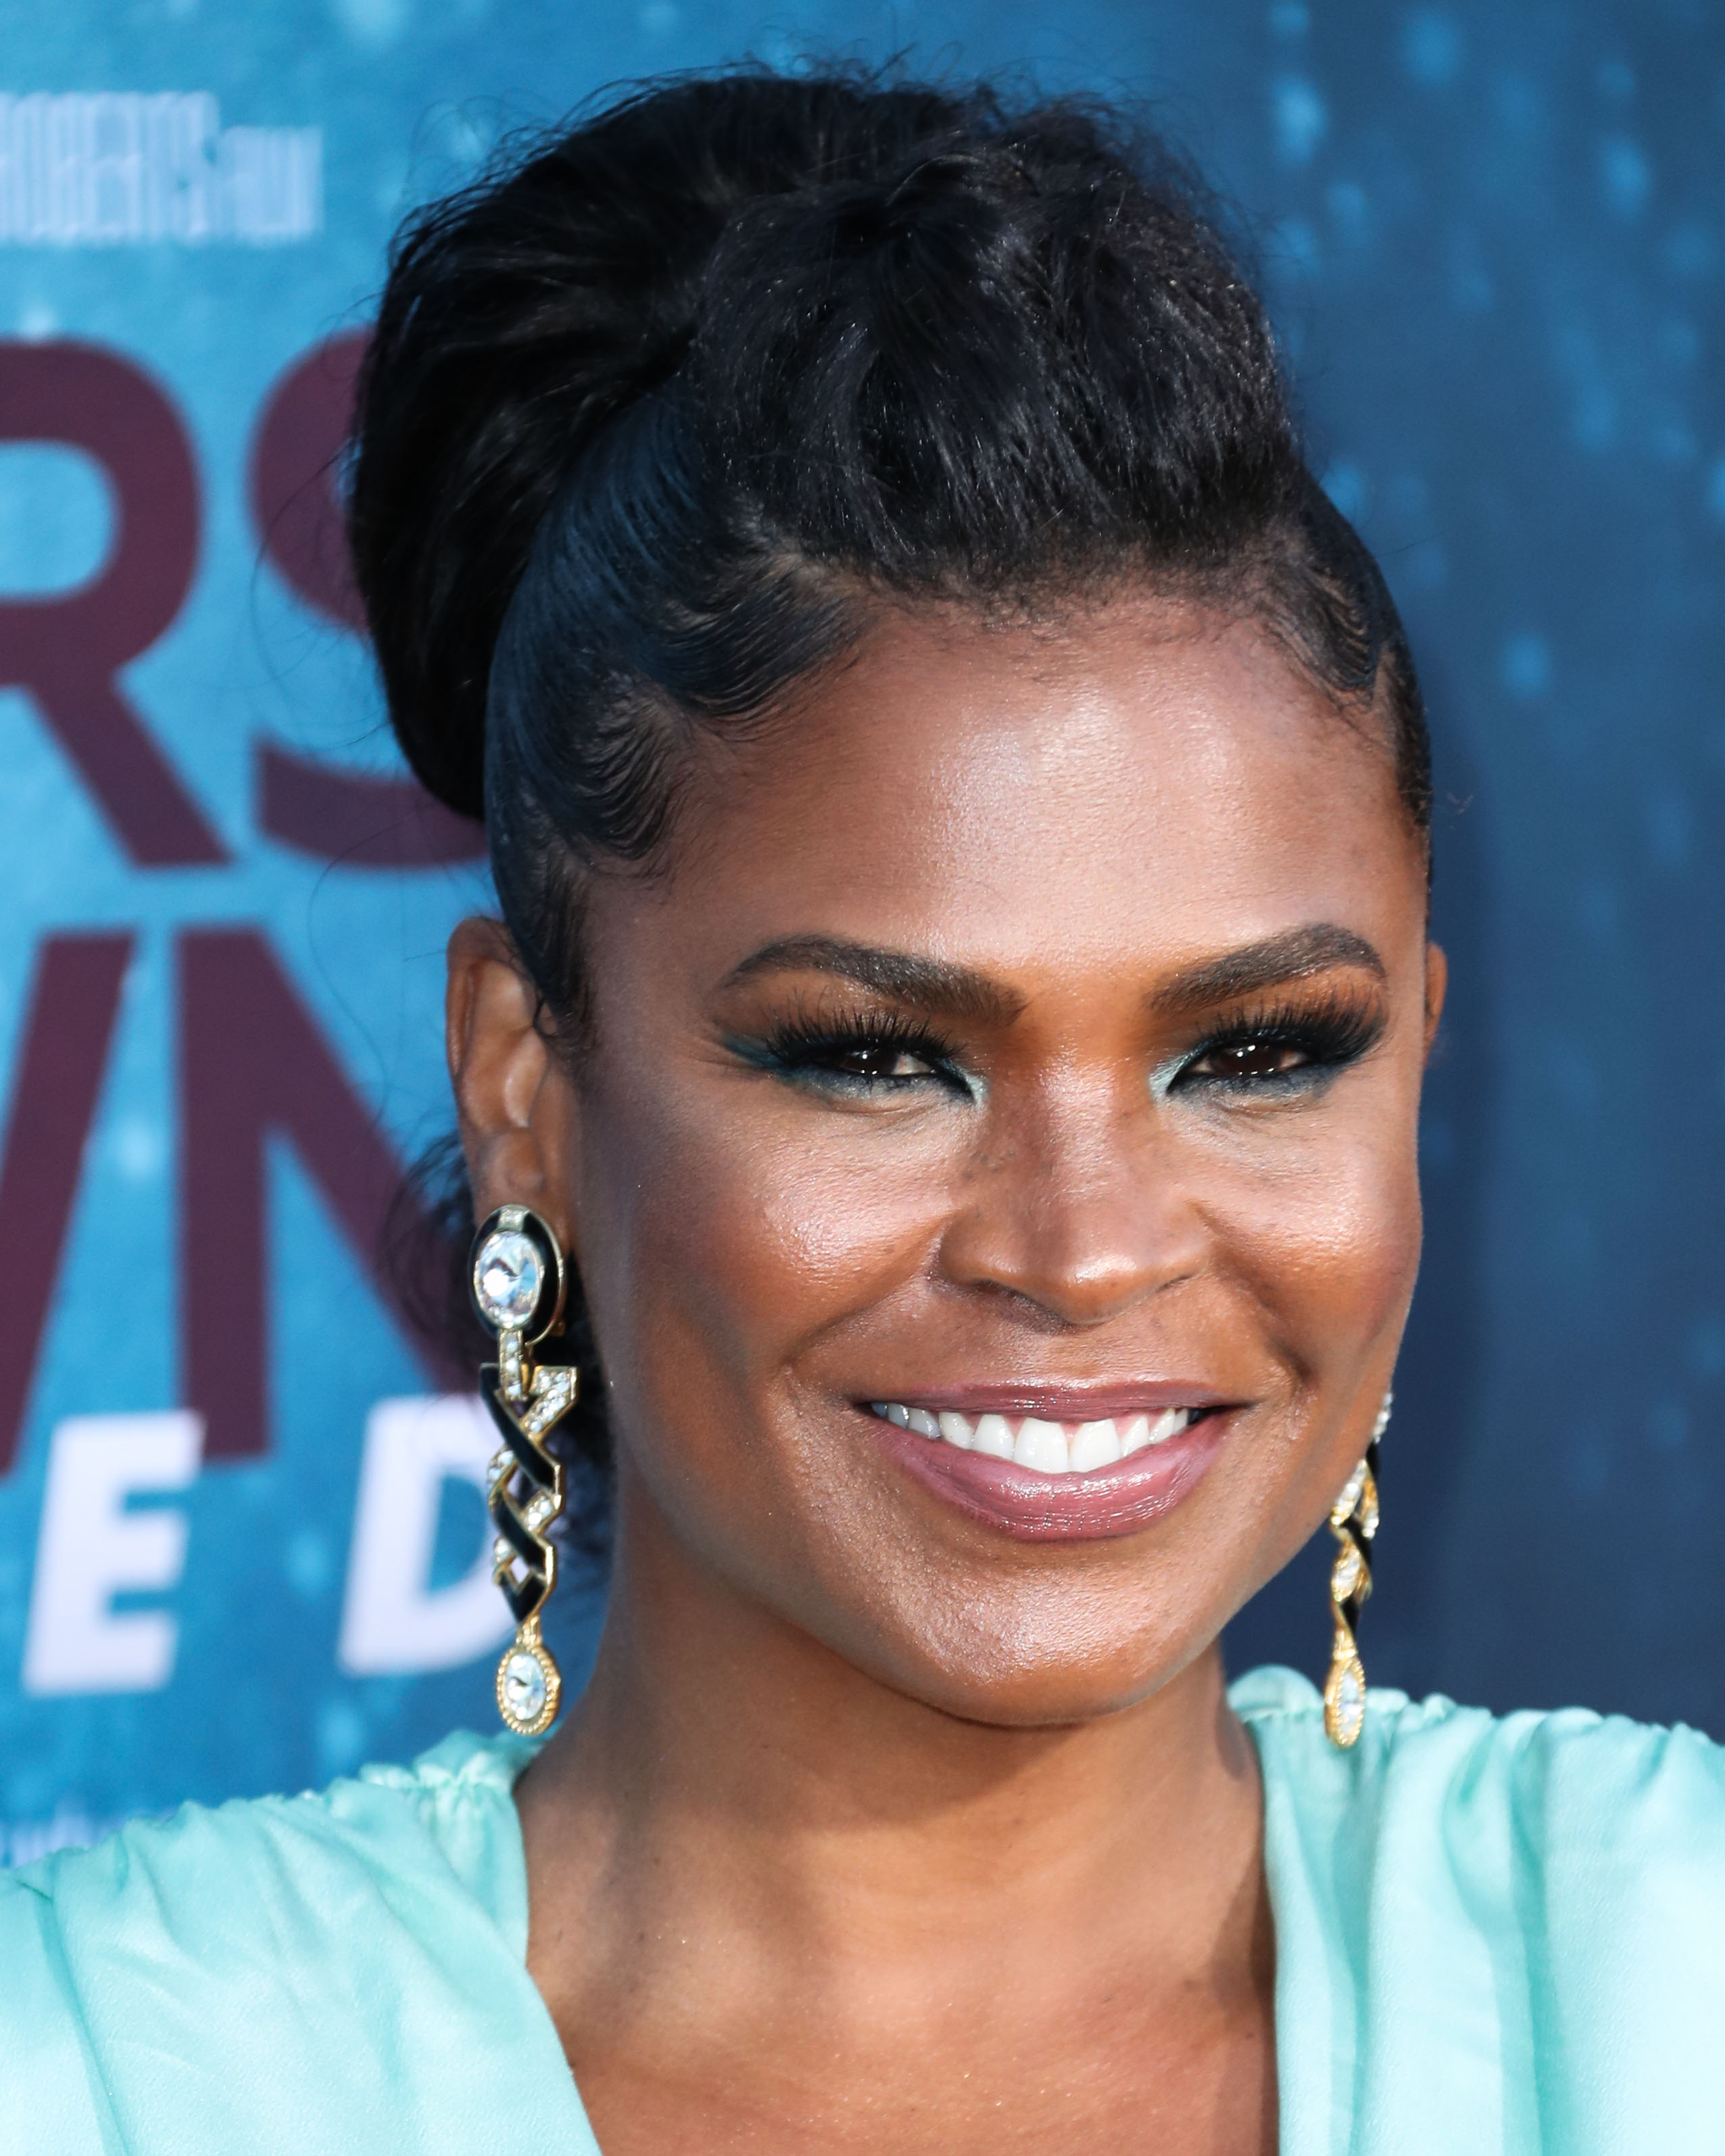 Actress Nia Long arrives at the Los Angeles Premiere Of Entertainment Studios' '47 Meters Down Uncaged' held at the Regency Village Theatre on August 13, 2019 in Westwood, Los Angeles, California, United States.